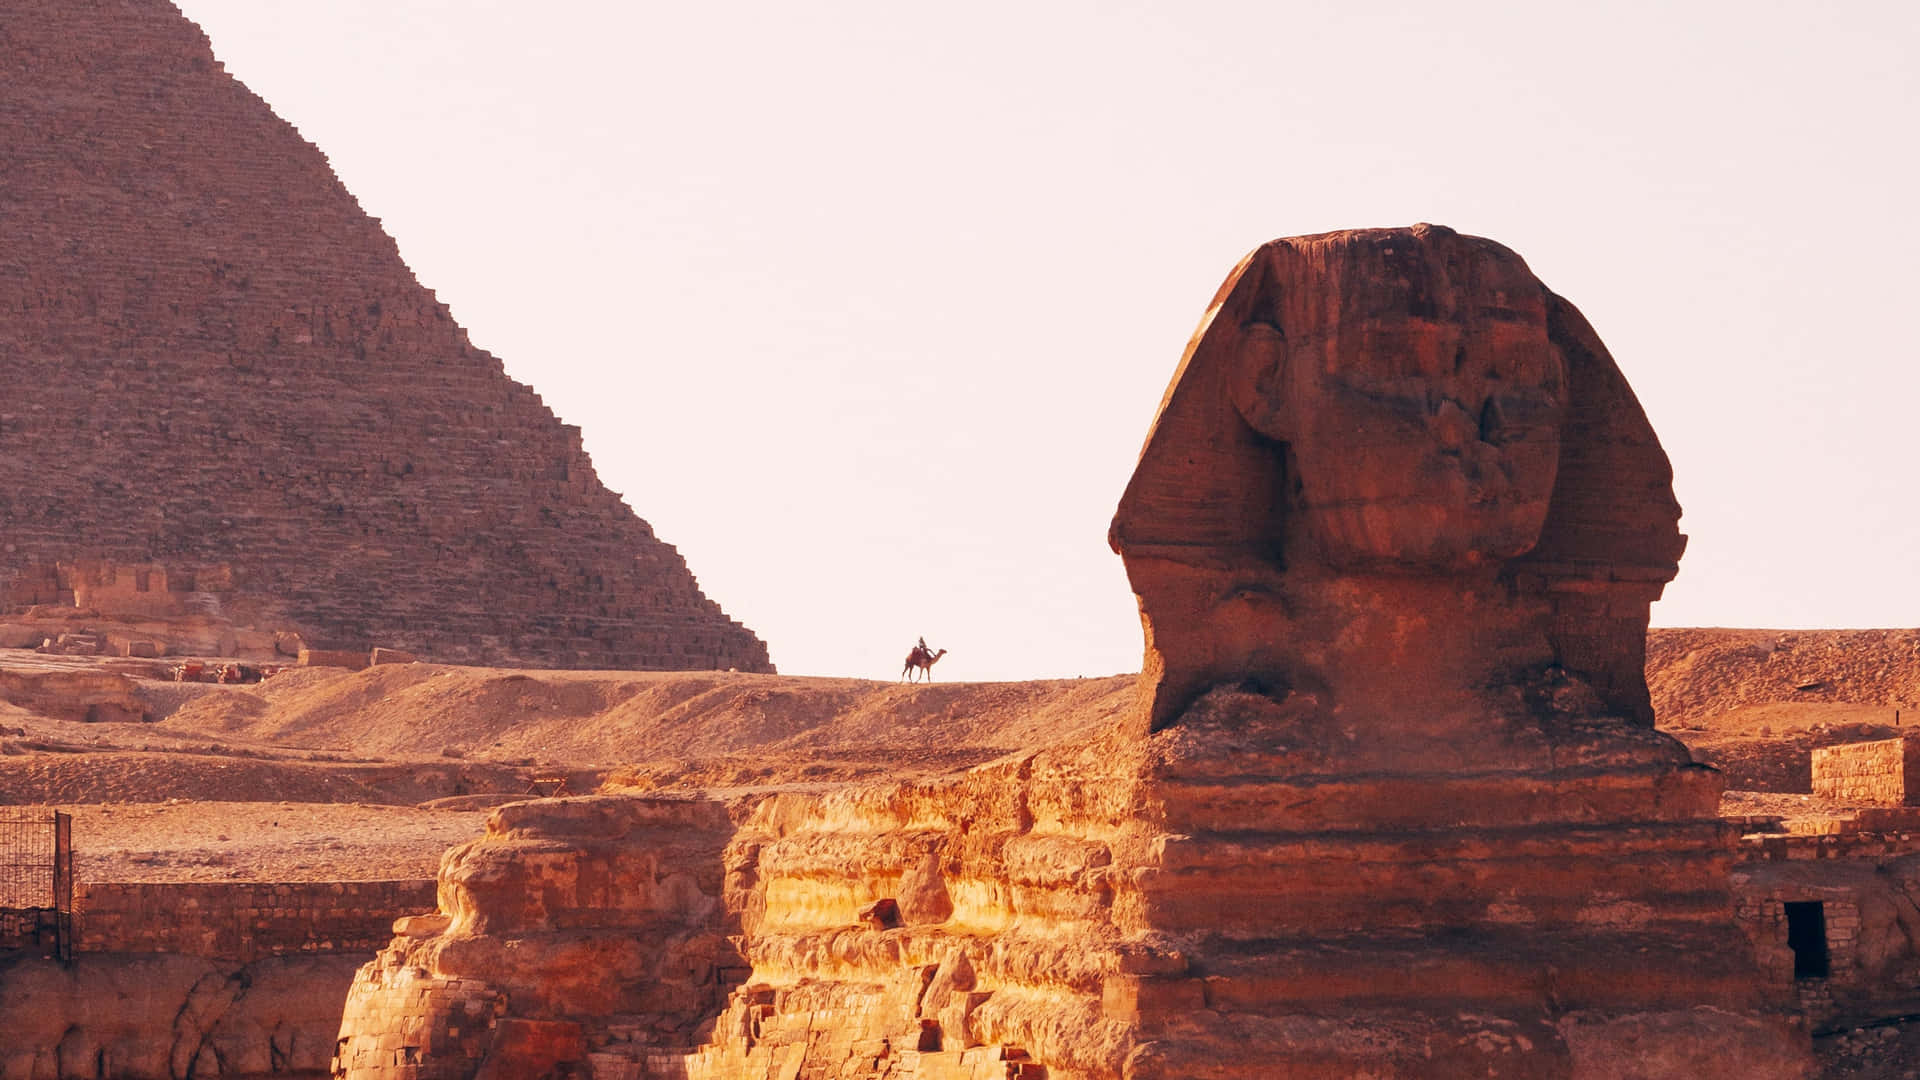 Majestic Sphinx Overlooking the Pyramids of Giza Wallpaper